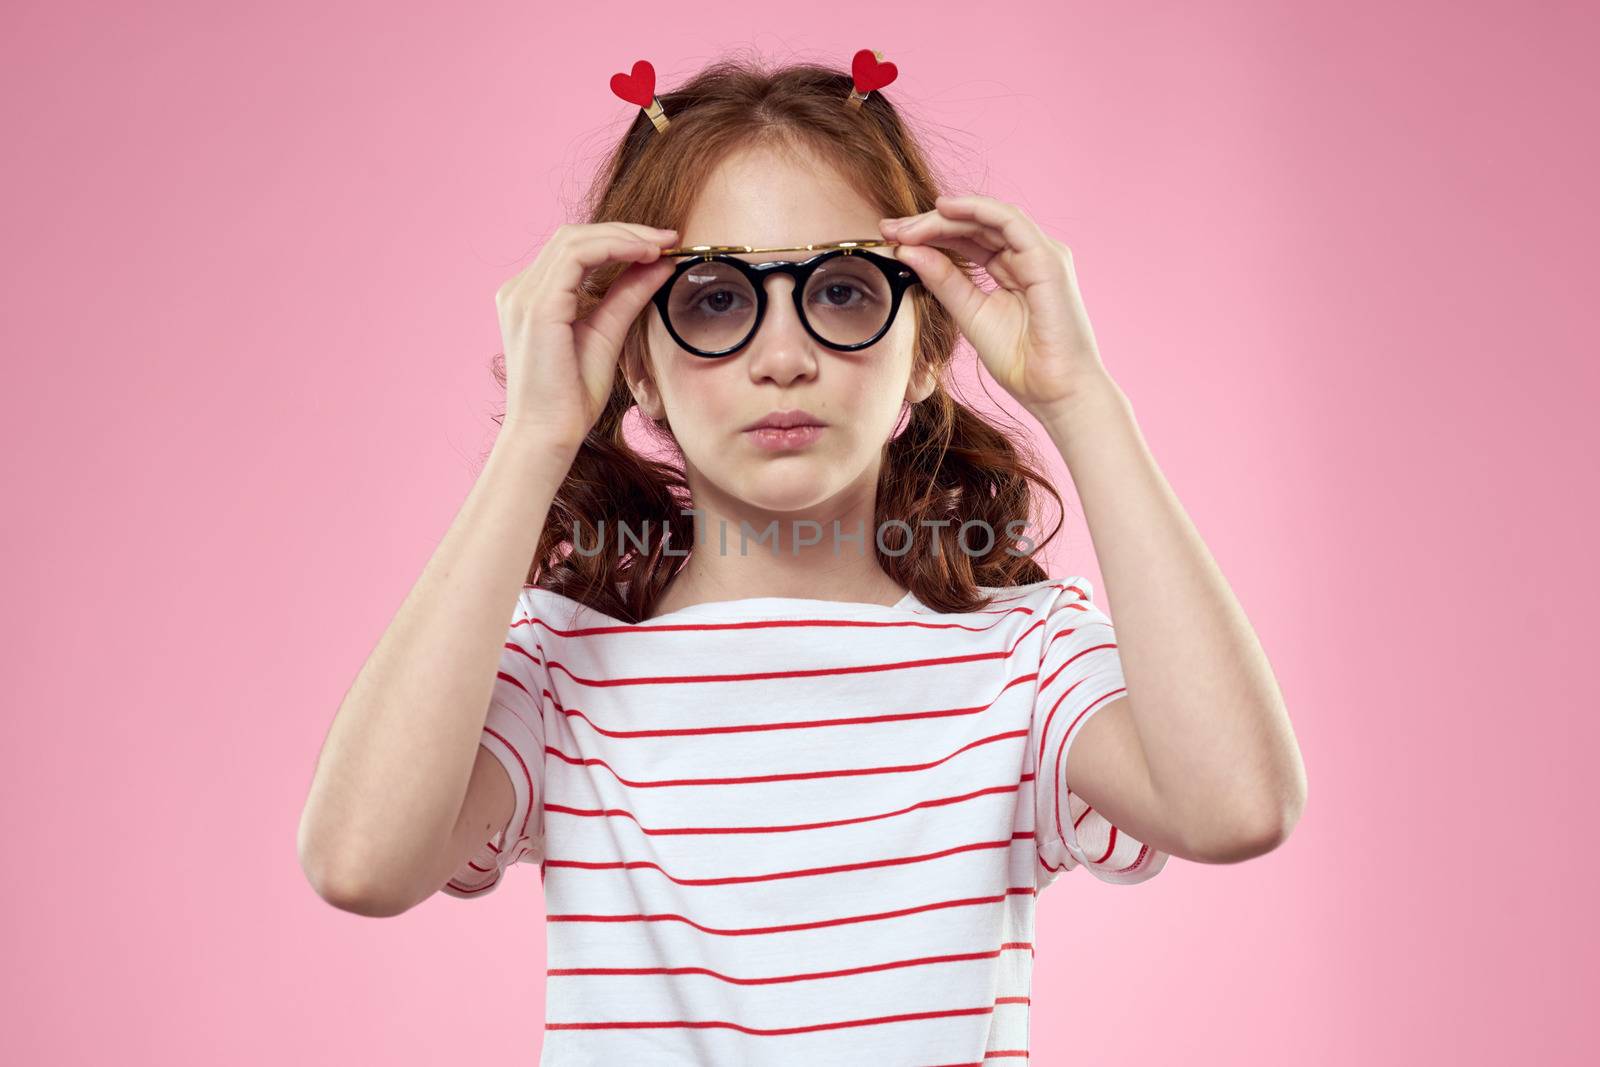 Cute girl sunglasses striped t-shirt lifestyle fun style pink background by SHOTPRIME